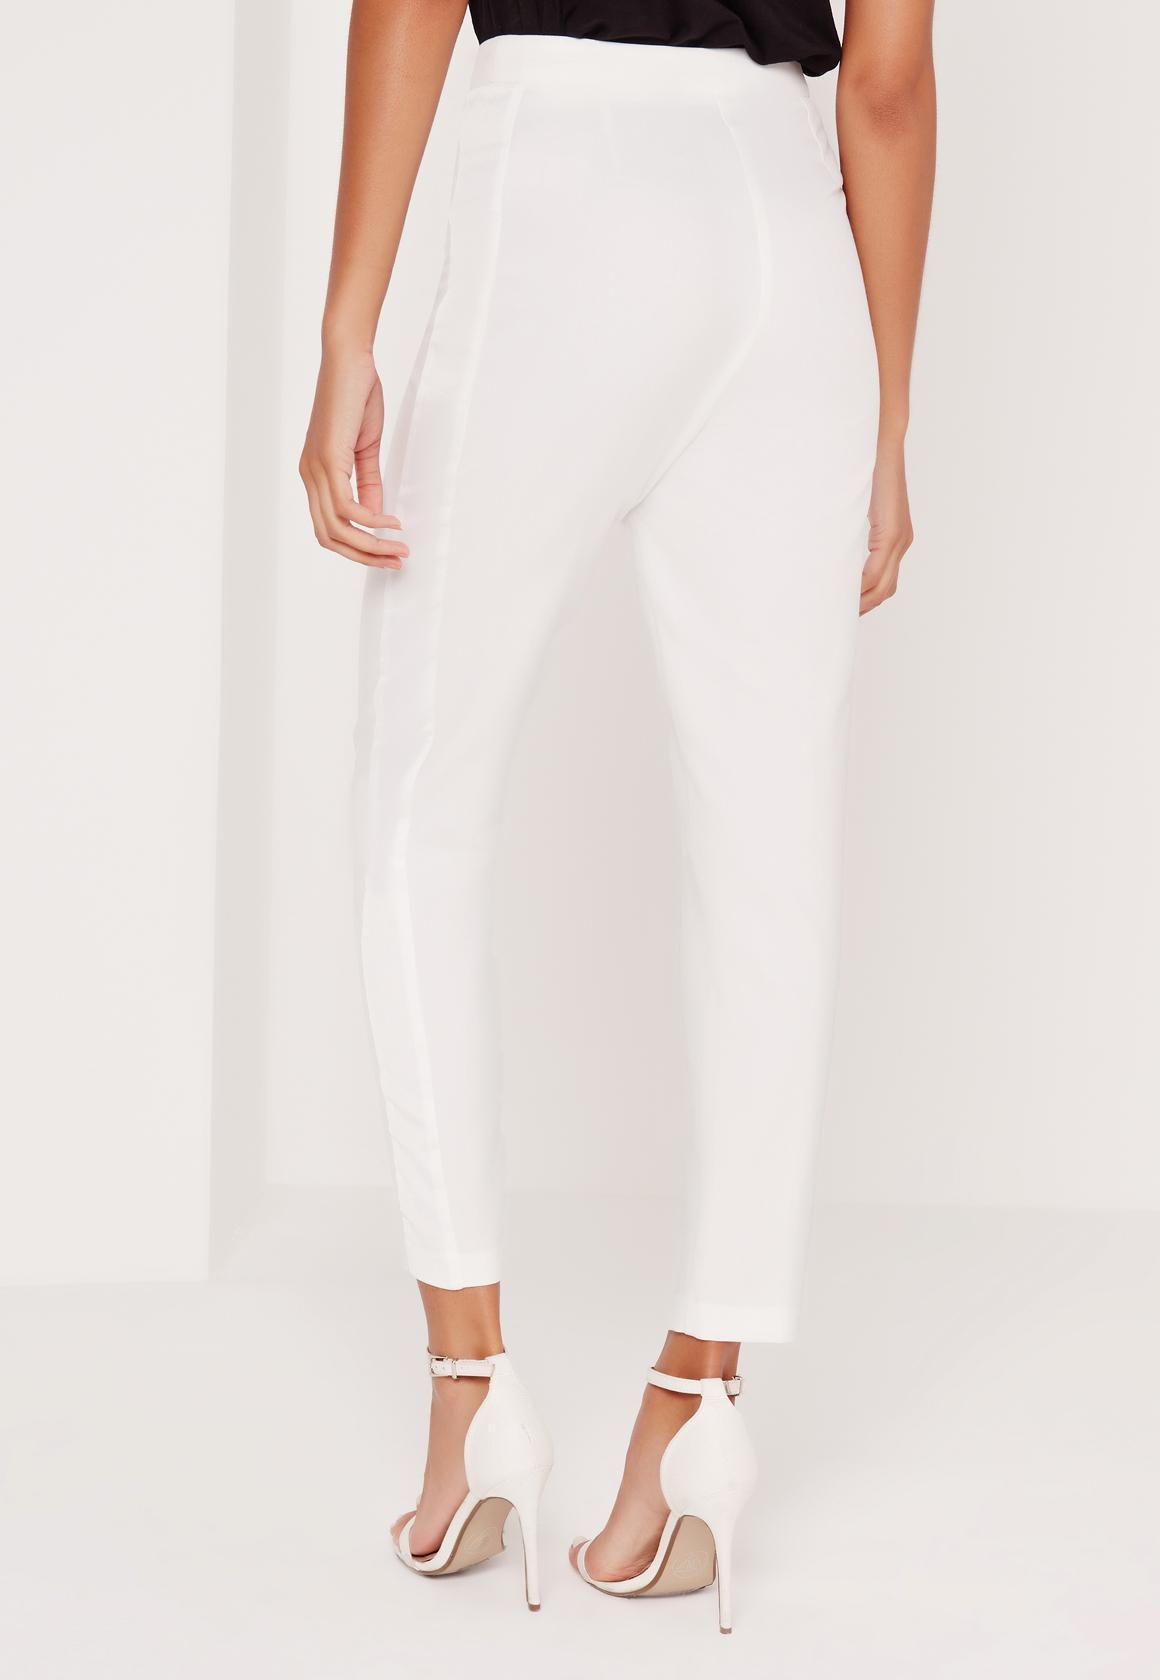 Lyst - Missguided Satin Panel Cigarette Pants Suit White in Black